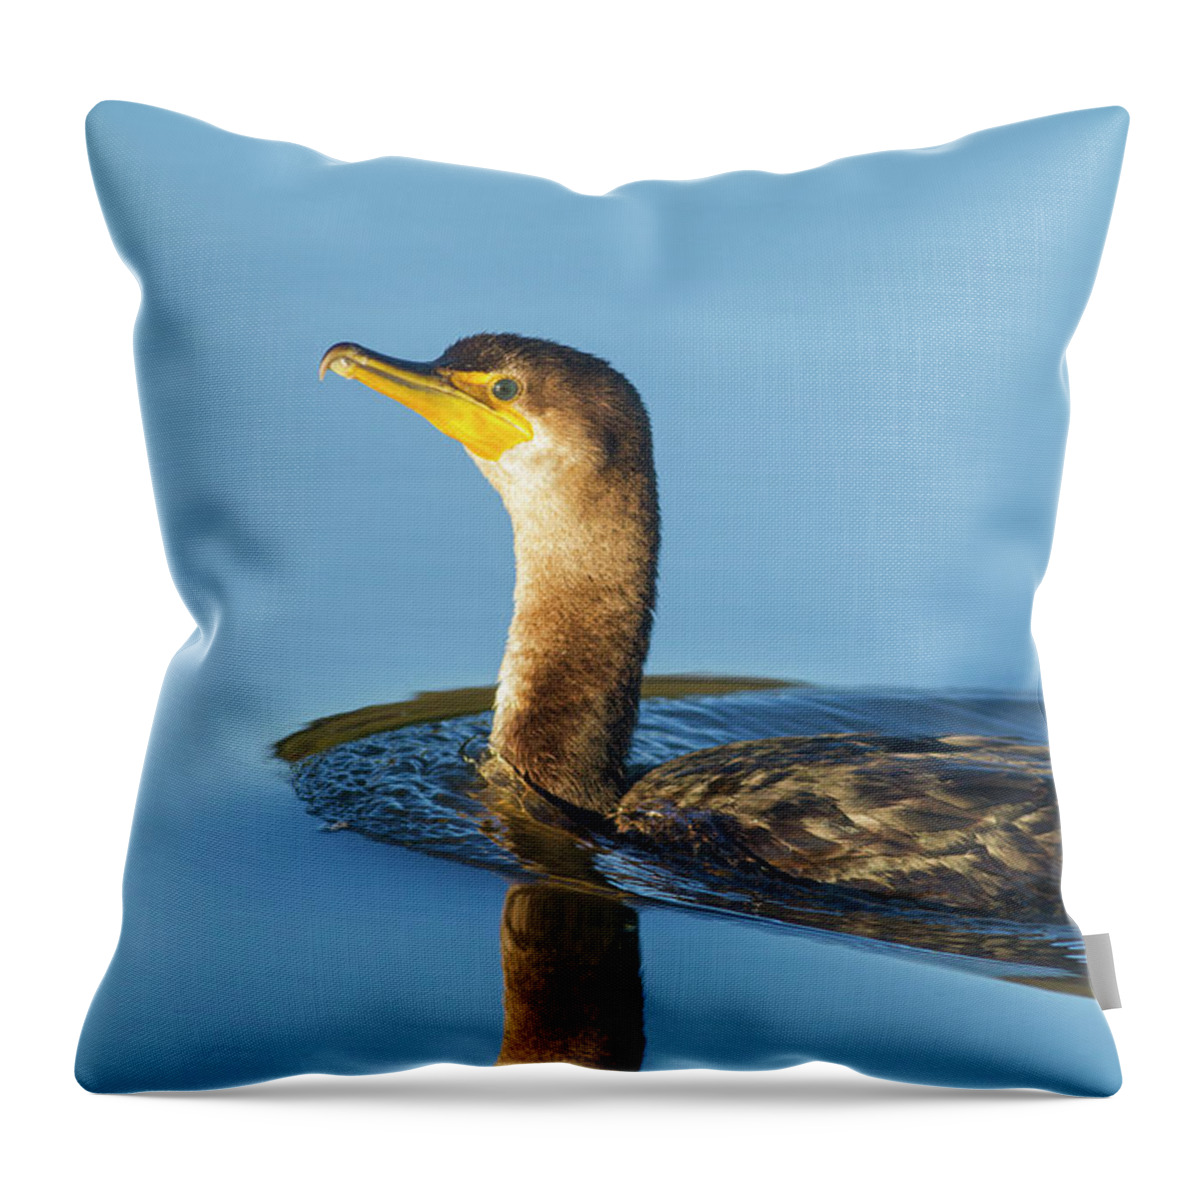 Cormorant Throw Pillow featuring the photograph Cormorant Reflection by Mark Miller